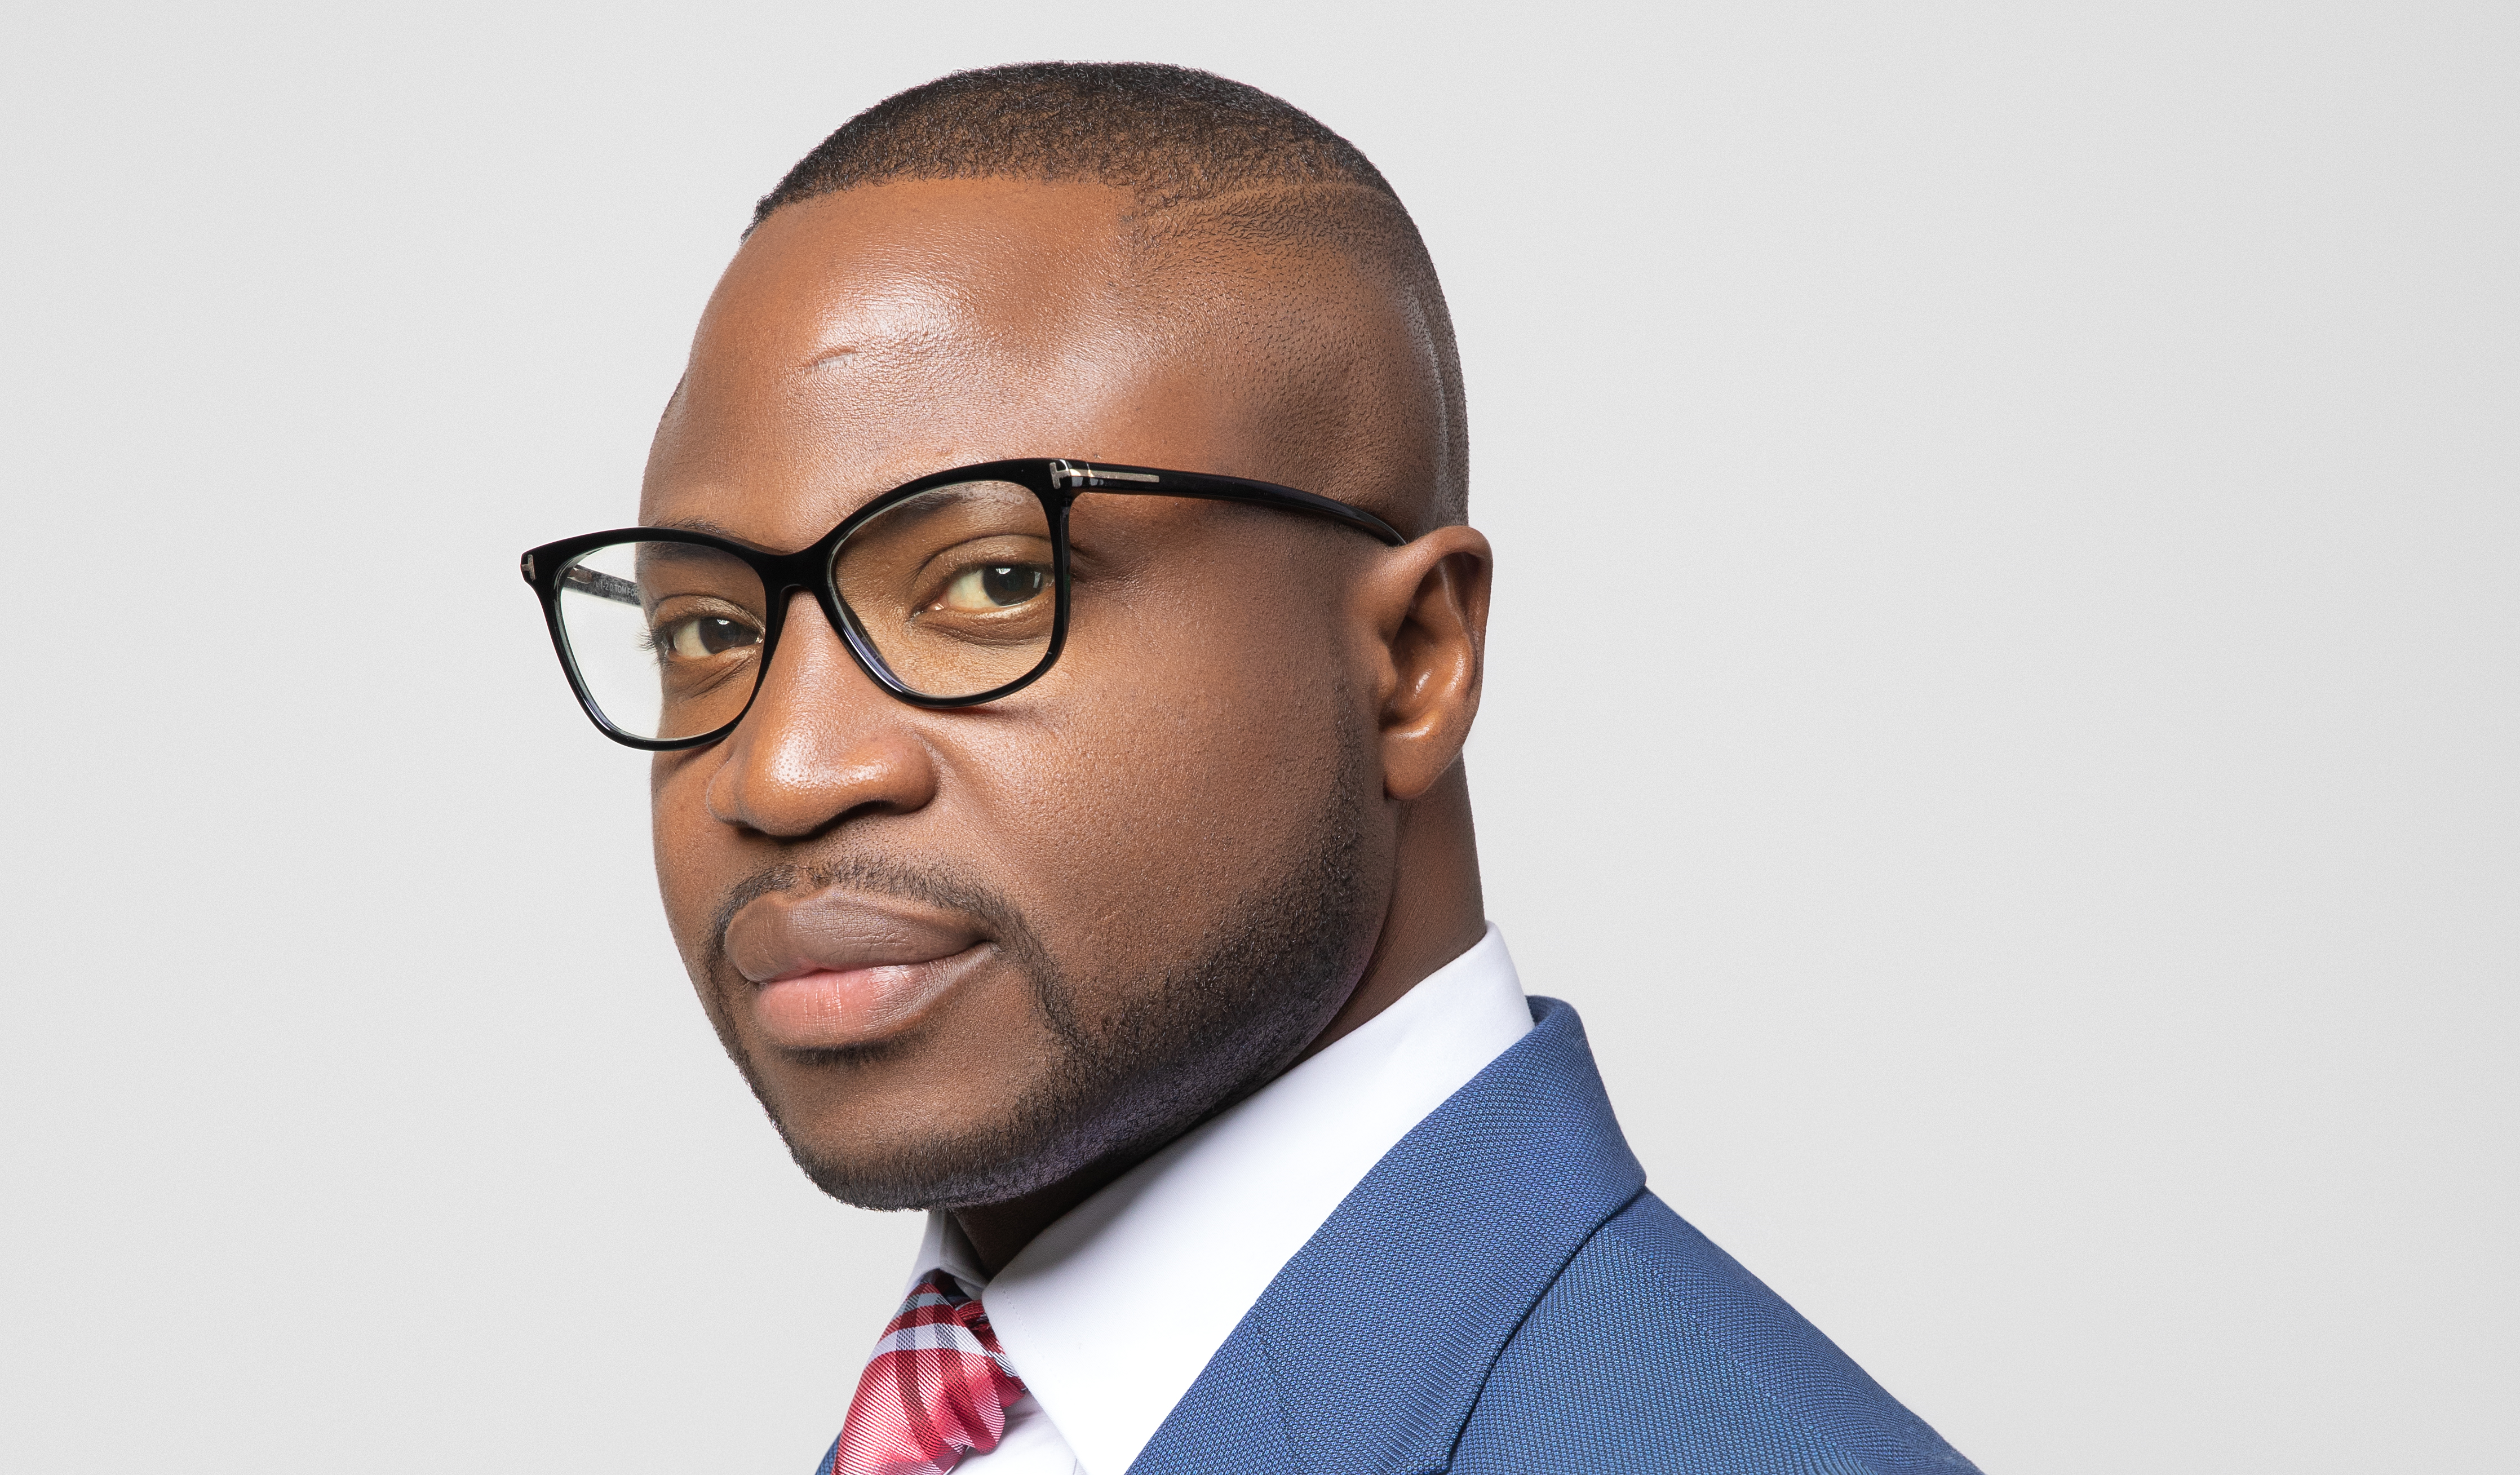 The Power of Real Estate: Bayo Adebowale Shares His Passion For and Expertise in the Industry